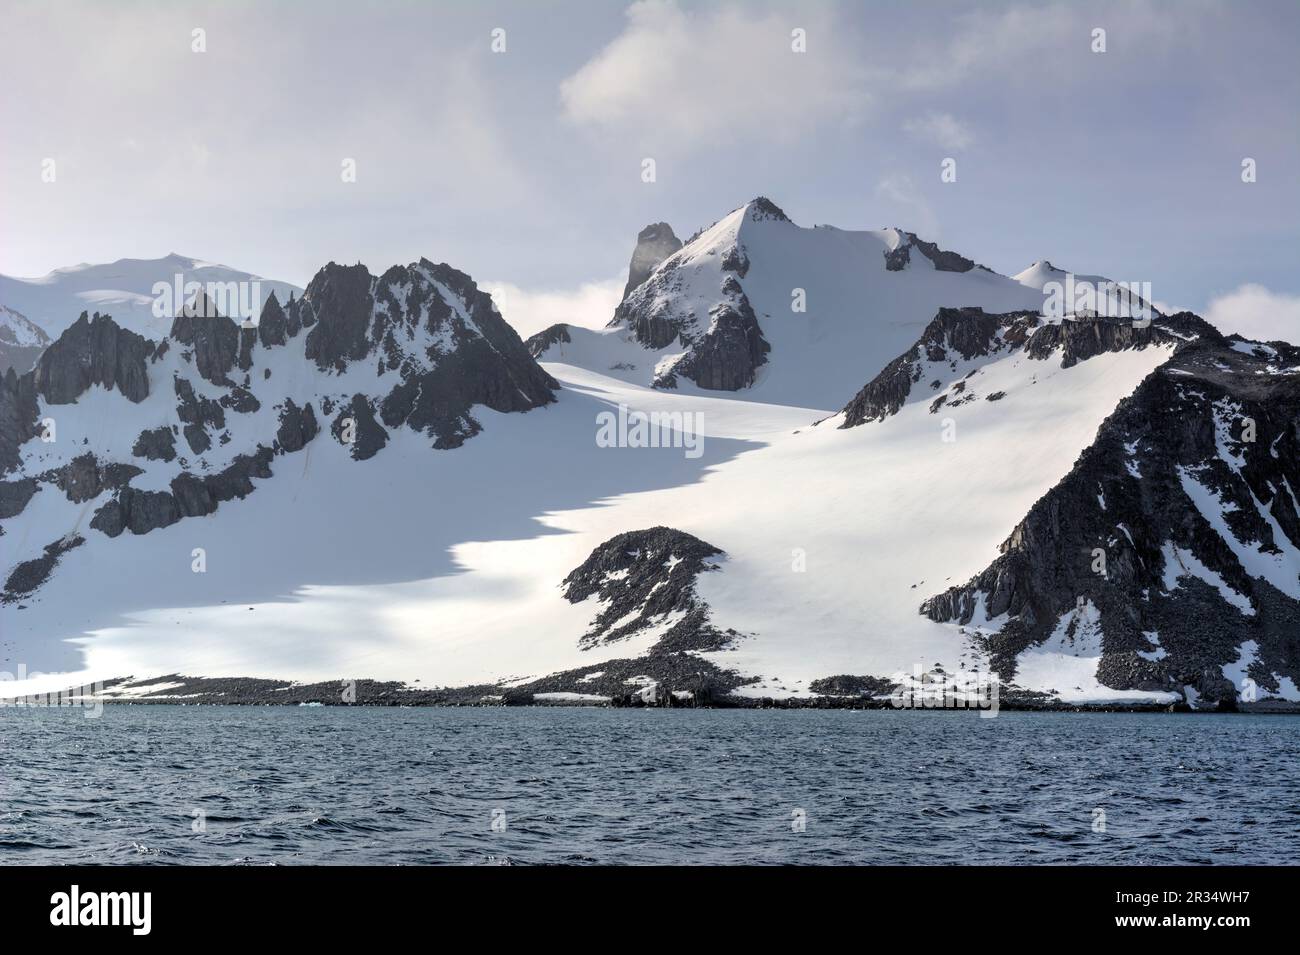 Snow-capped mountains and rocks of Antarctica Stock Photo